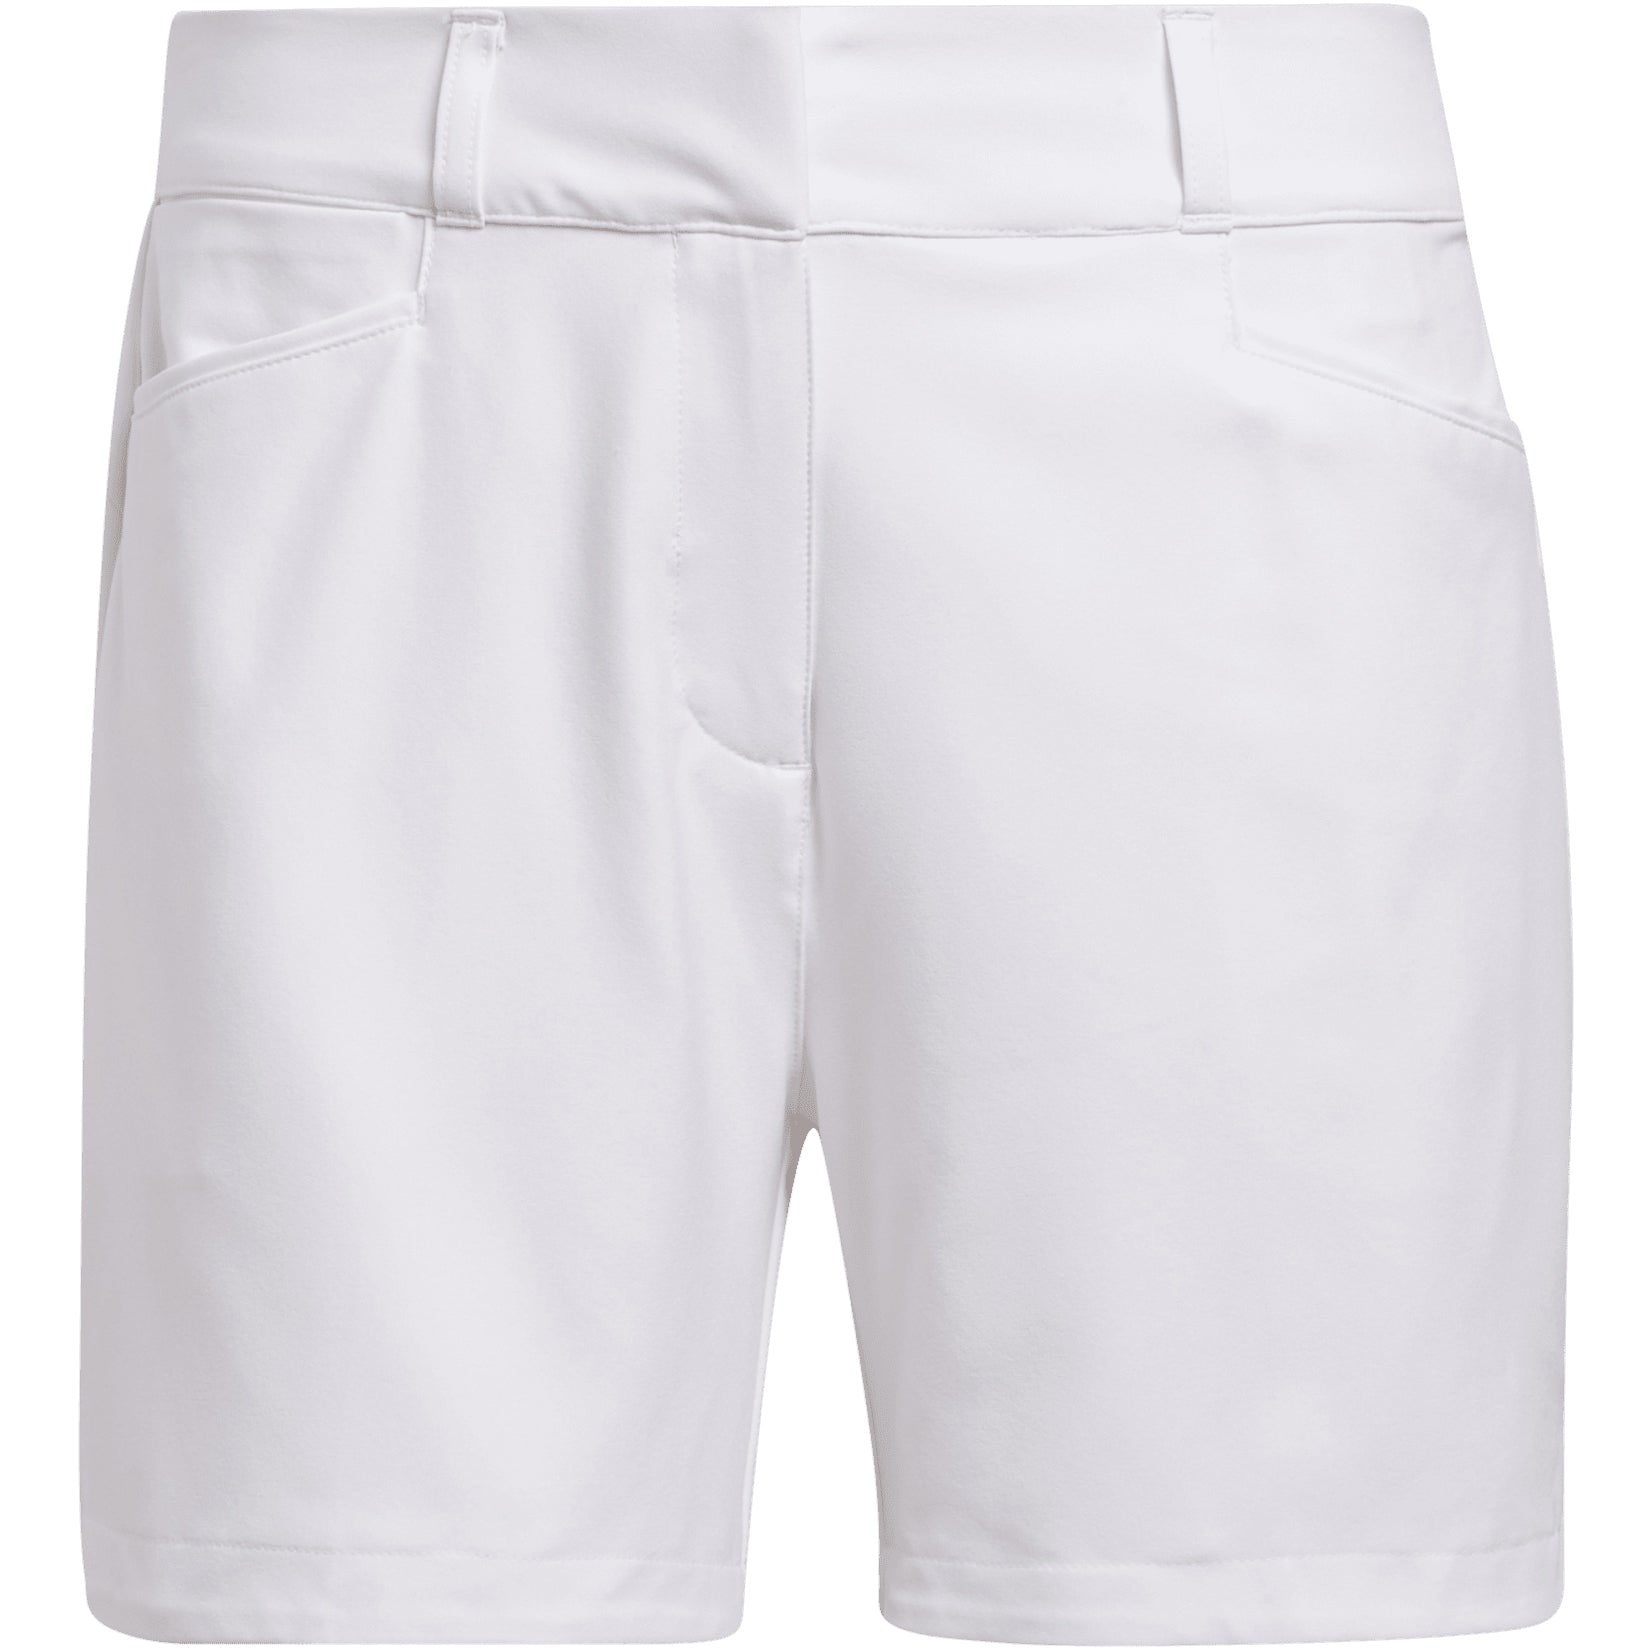 Perfect Shorts - 5 - Solid